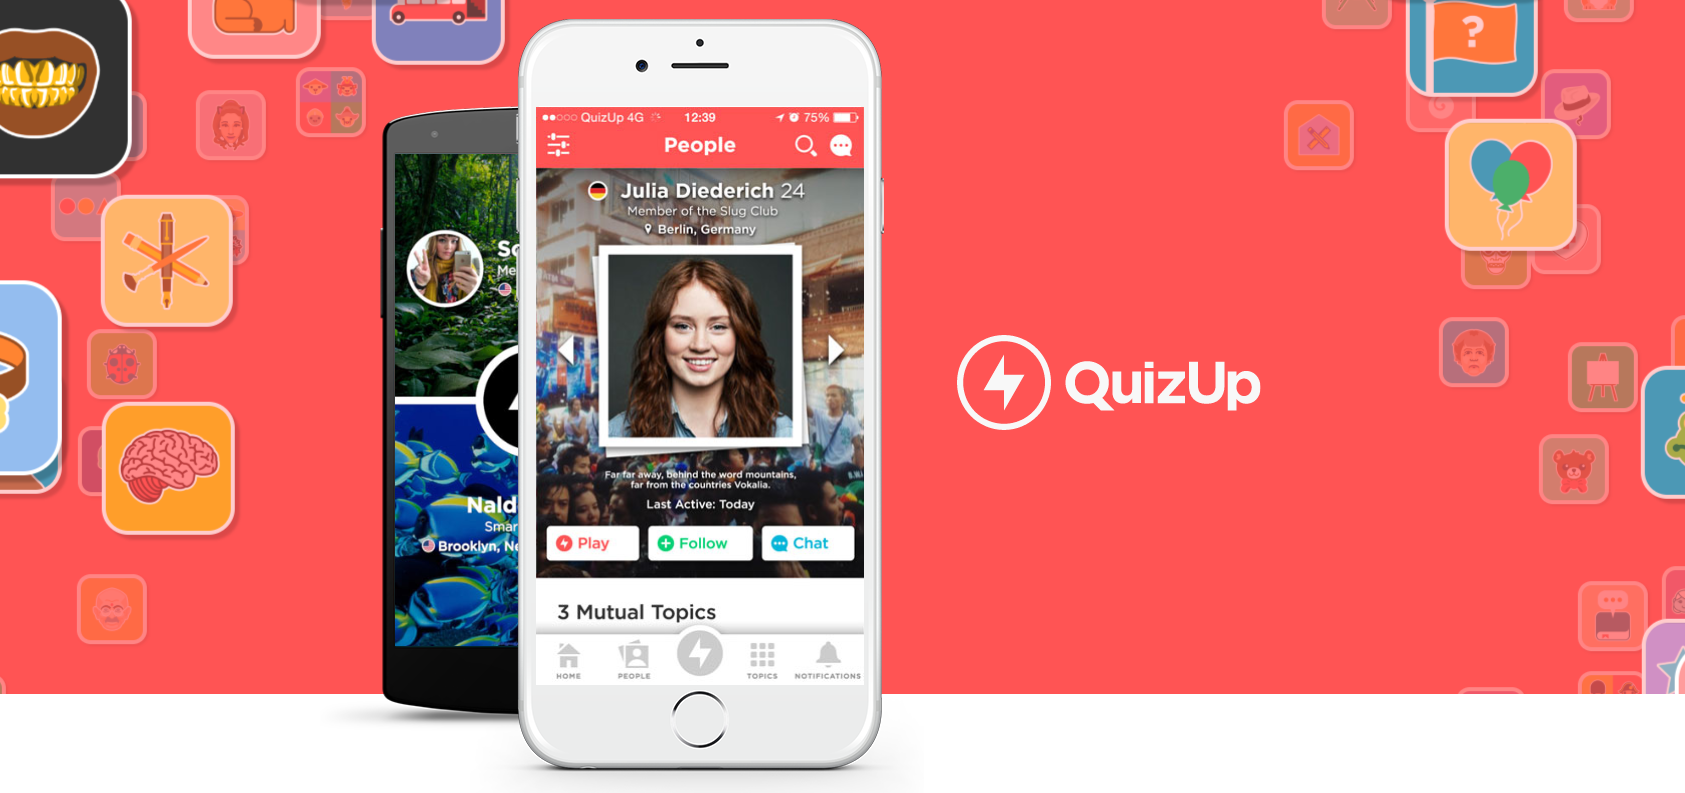 QuizUp - Mejores trivial online